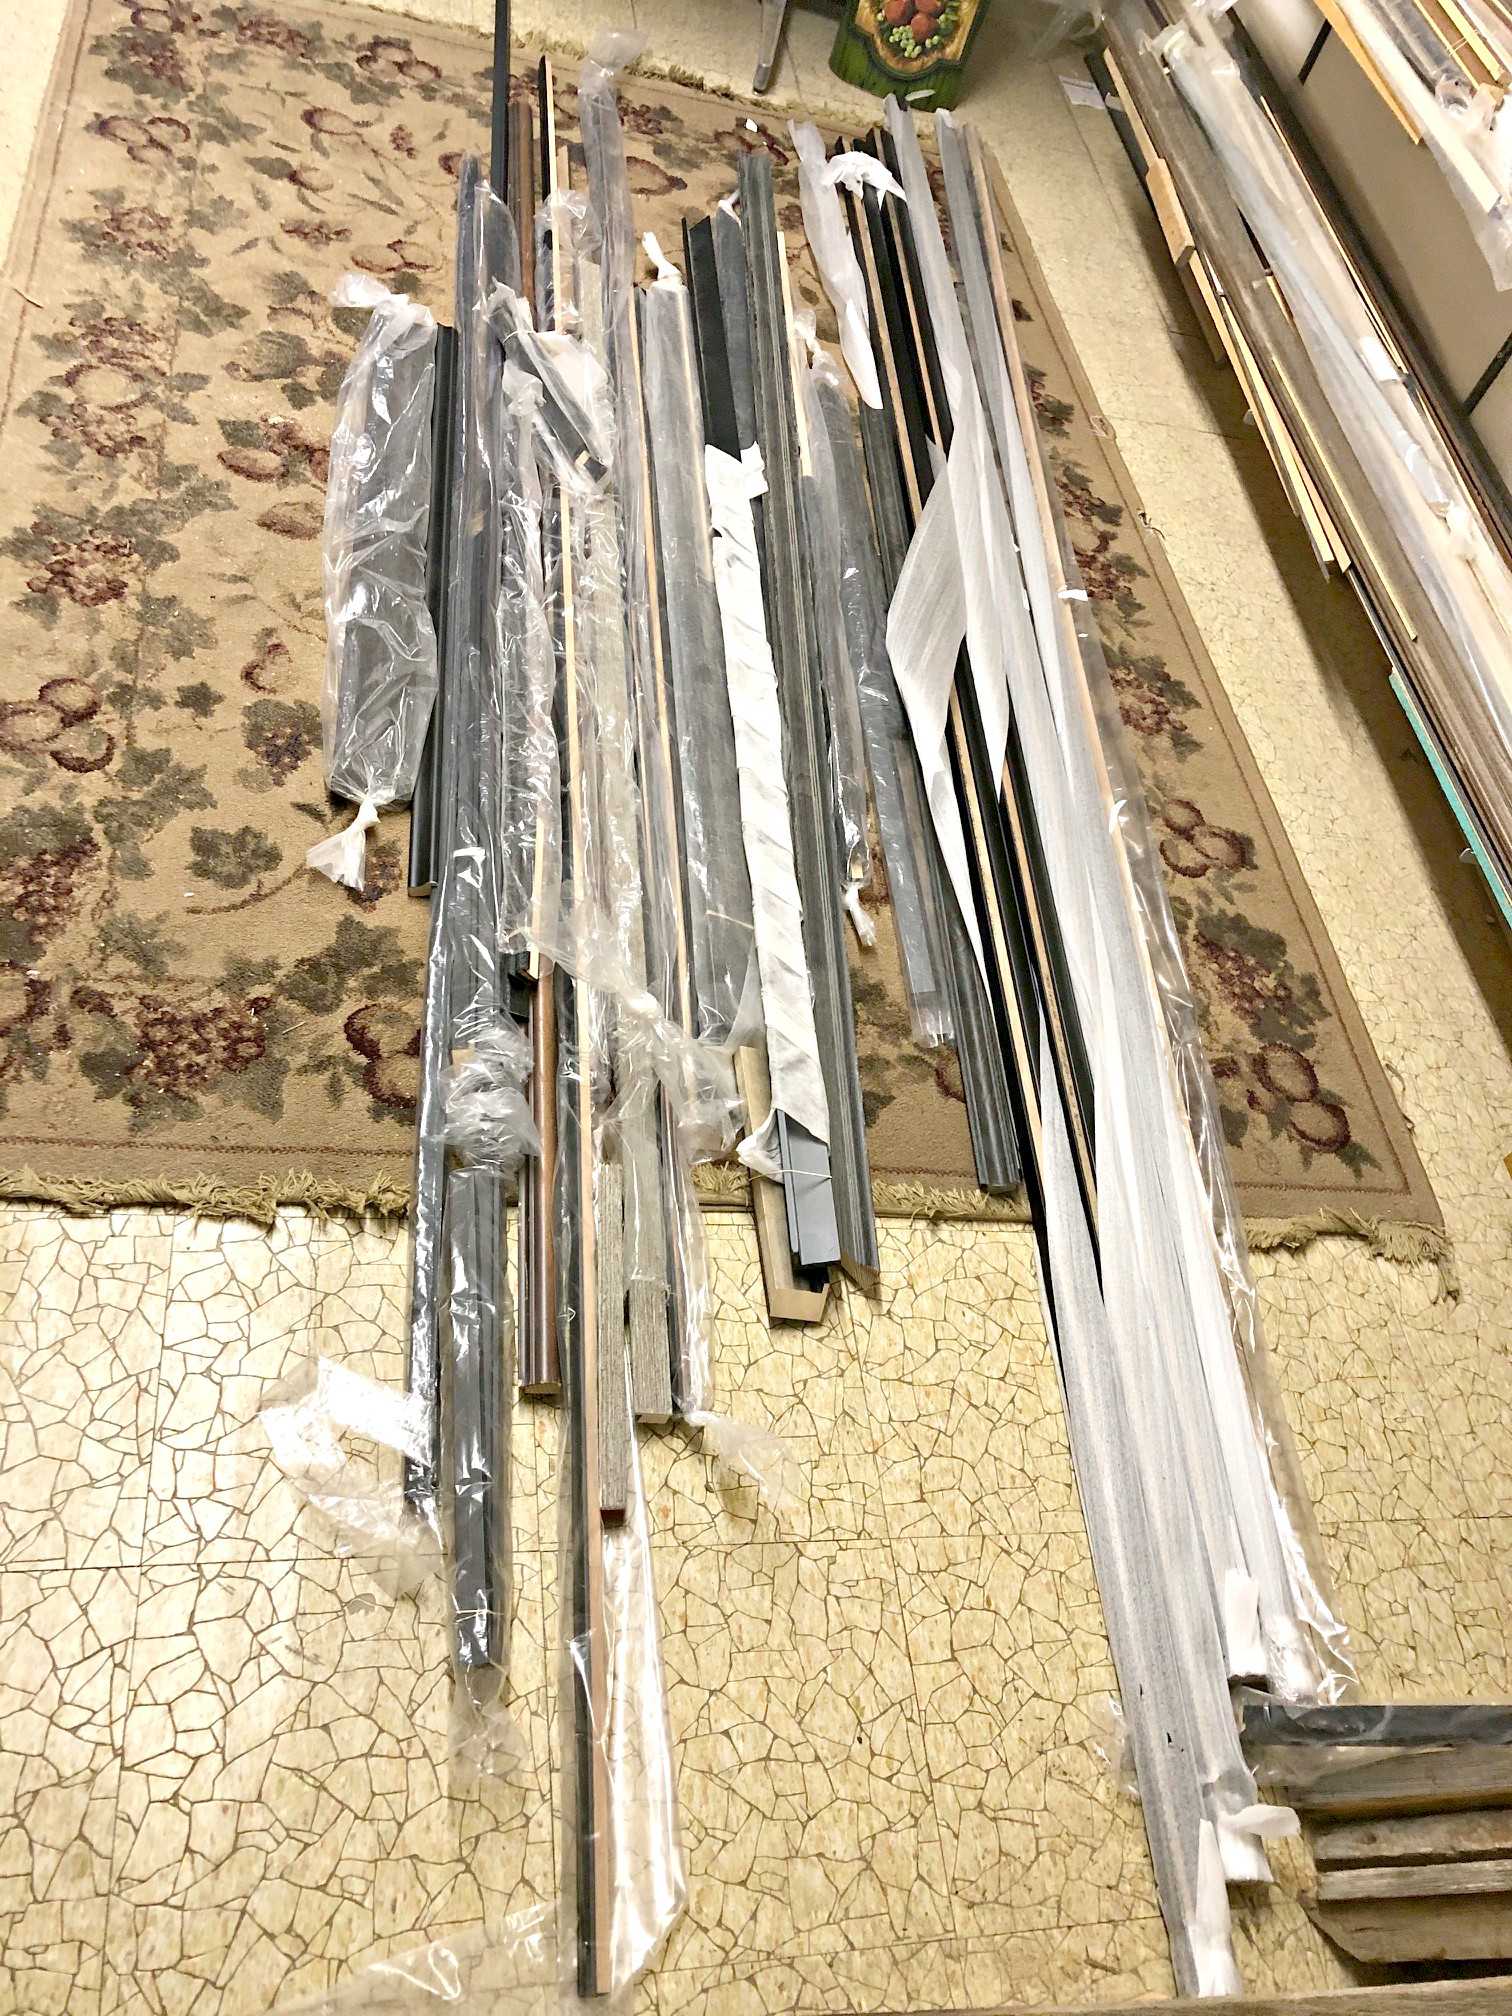 Picture Framing Equipment Lot (used) Item # AGFS-89 (Colorado)